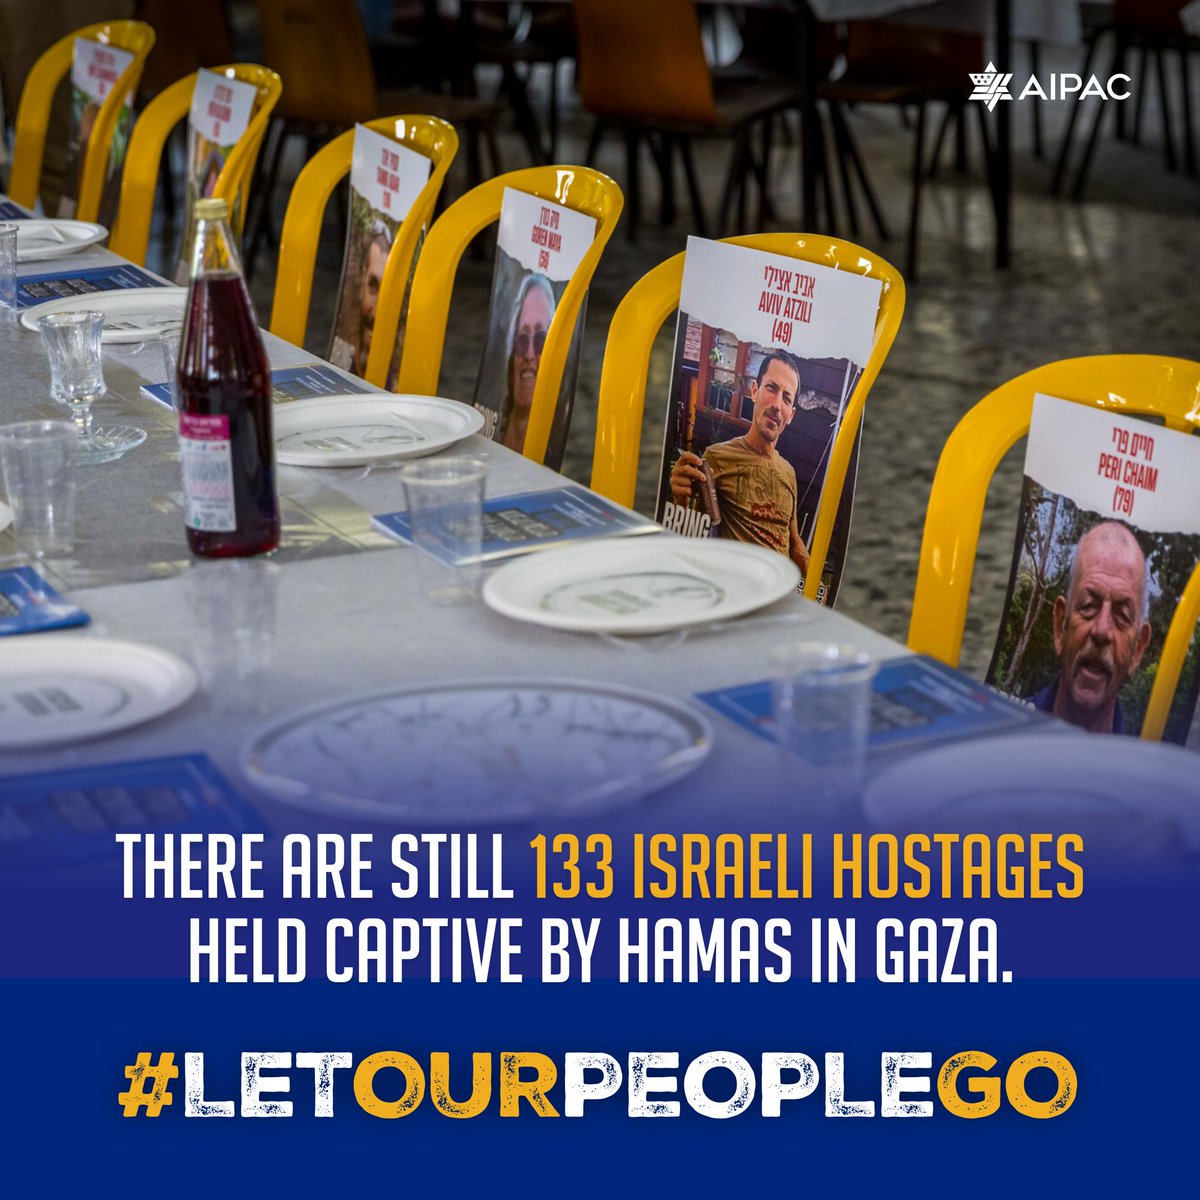 This Passover, the Seder tables aren't complete. 133 hostages are still being held captive by Hamas in Gaza.

#LetOurPeopleGo #FreeTheHostages @bringhomenow